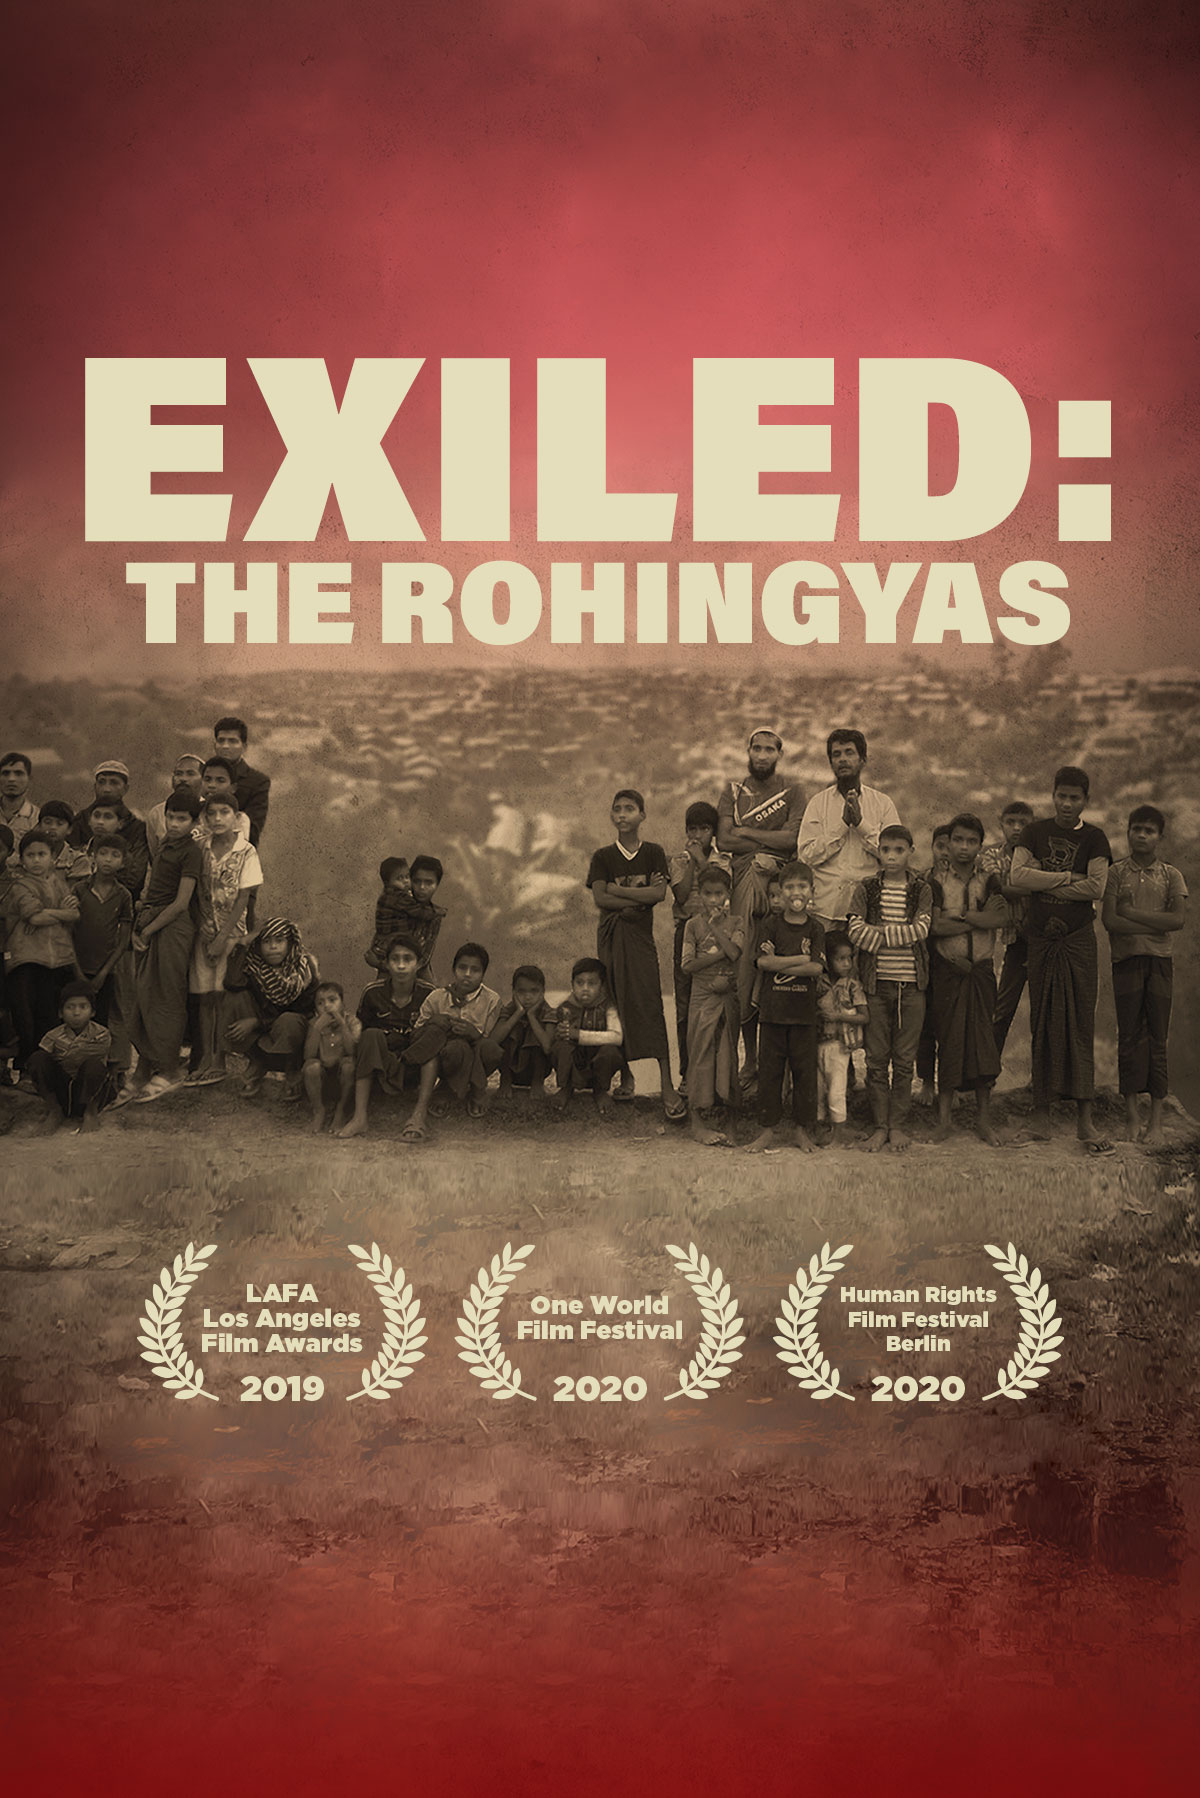 Exiled: The Rohingyas